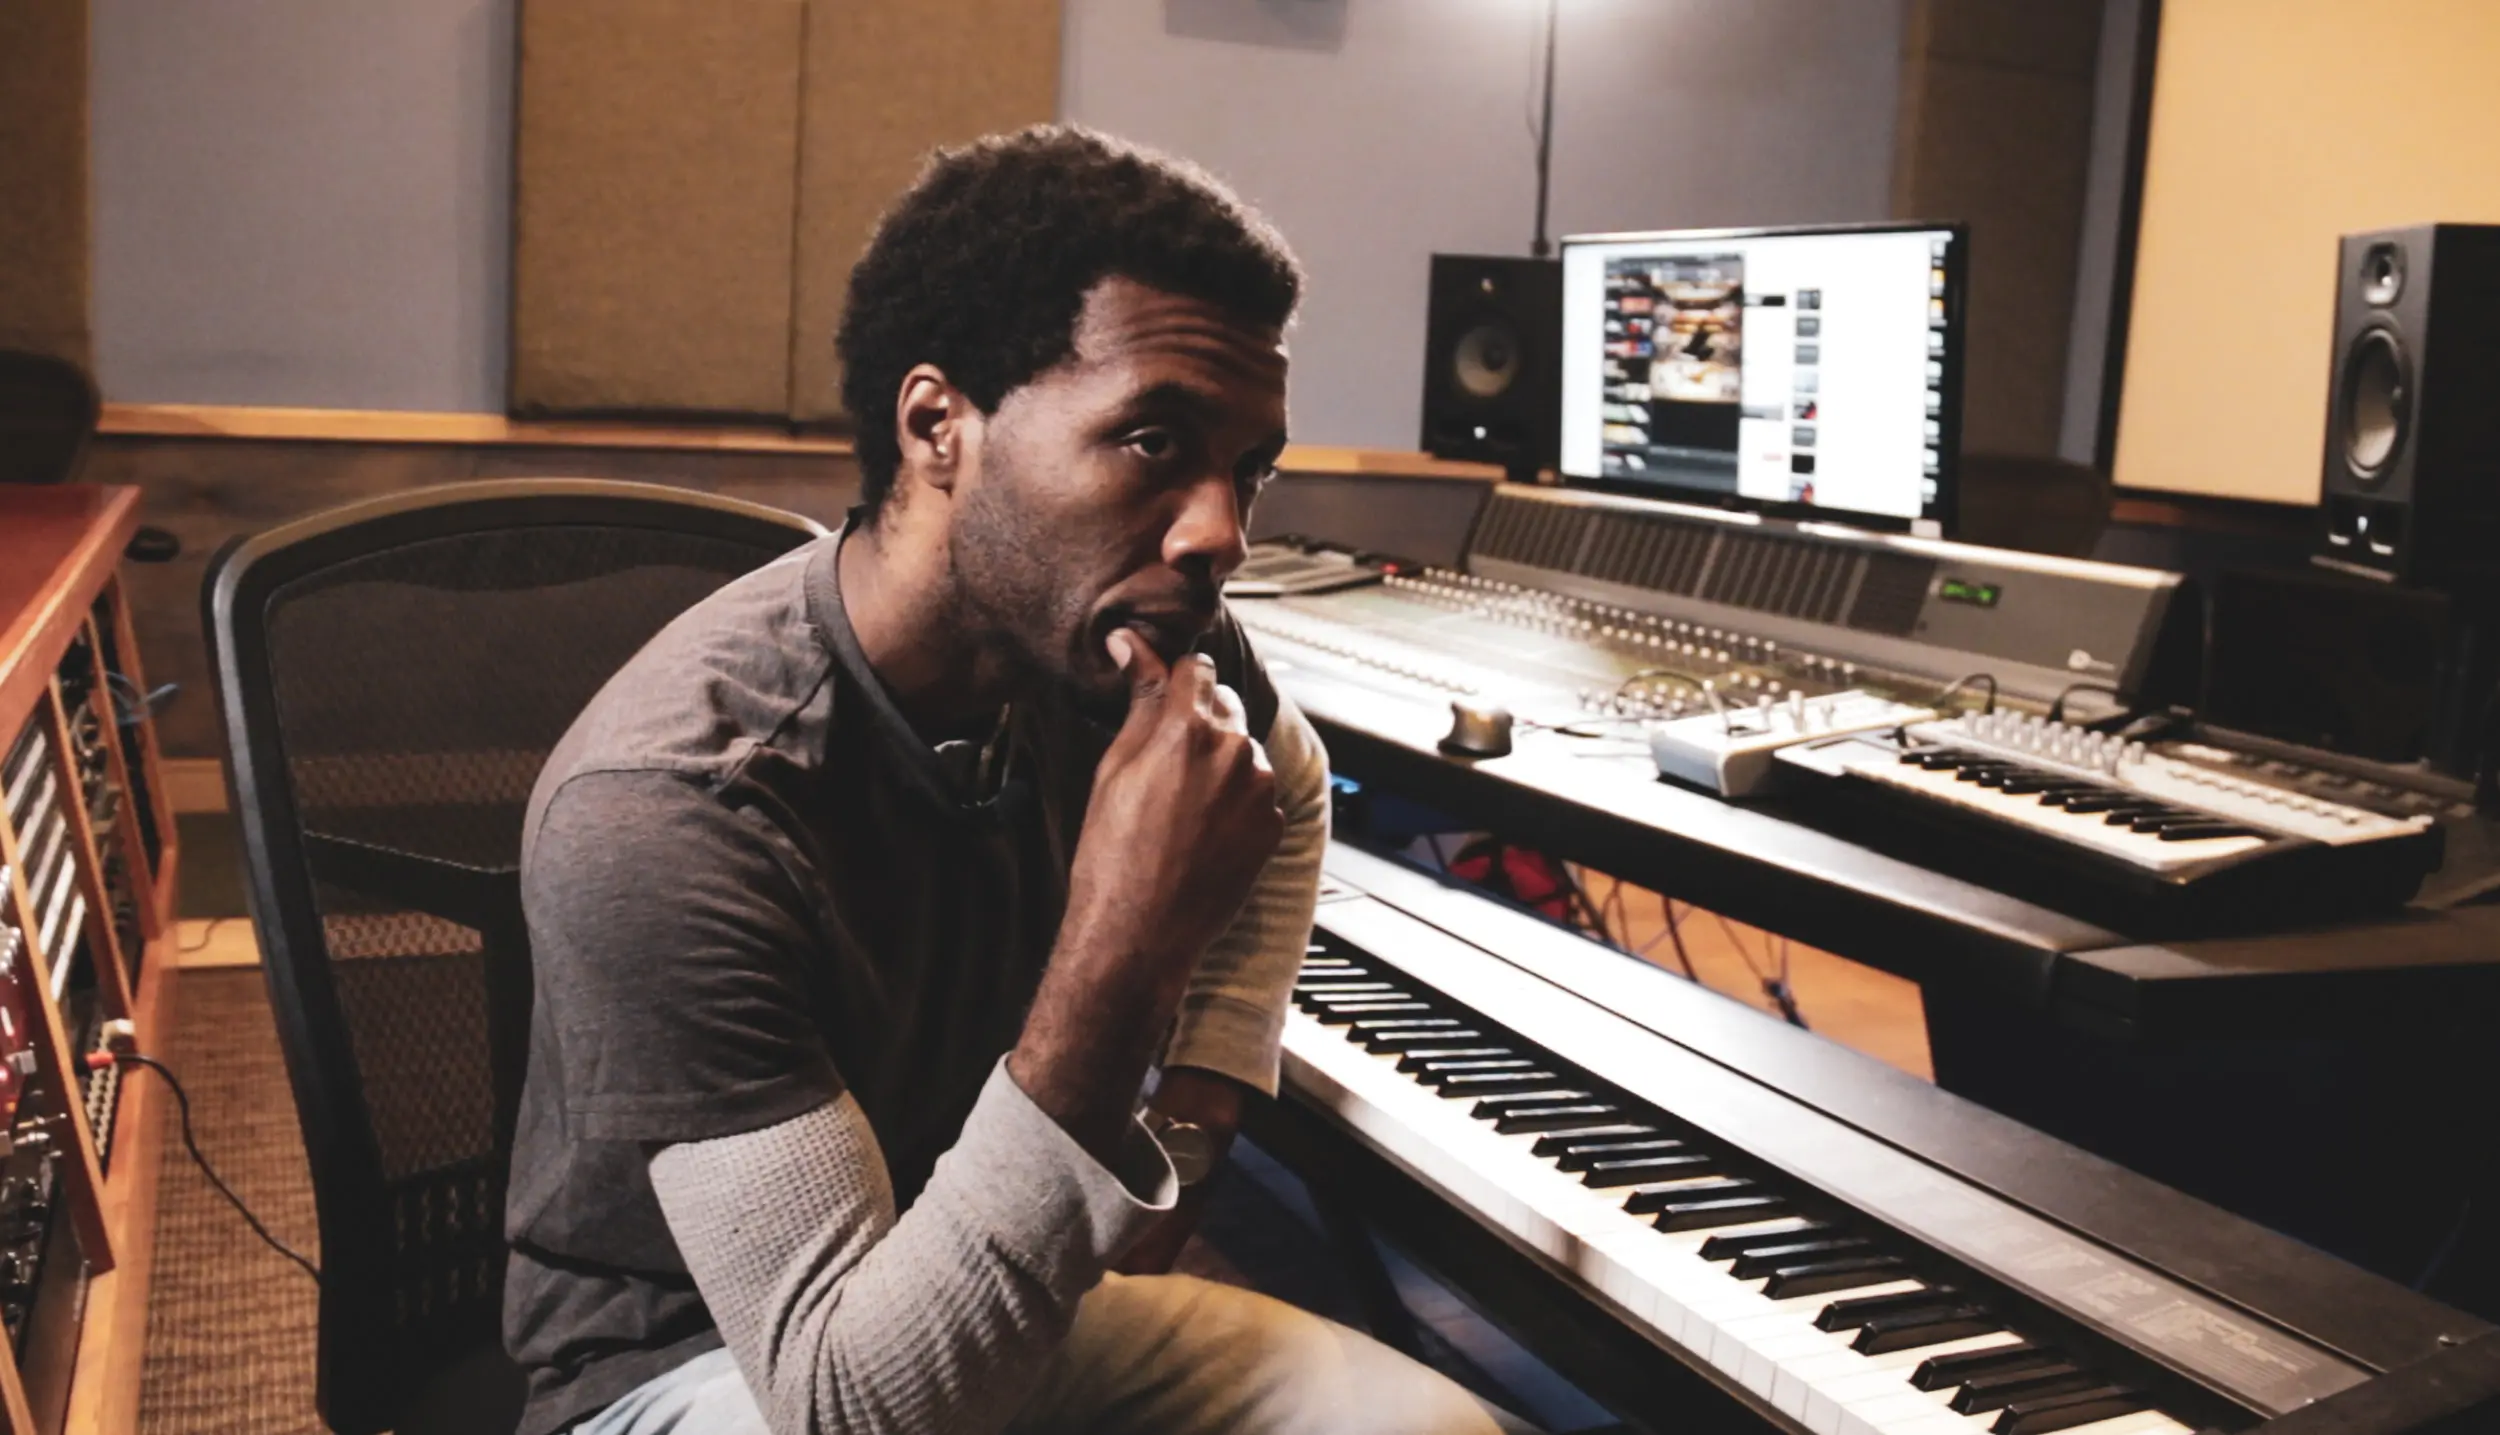 A music producer sitting in front of a keyboard in a recording studio, using a music production program.